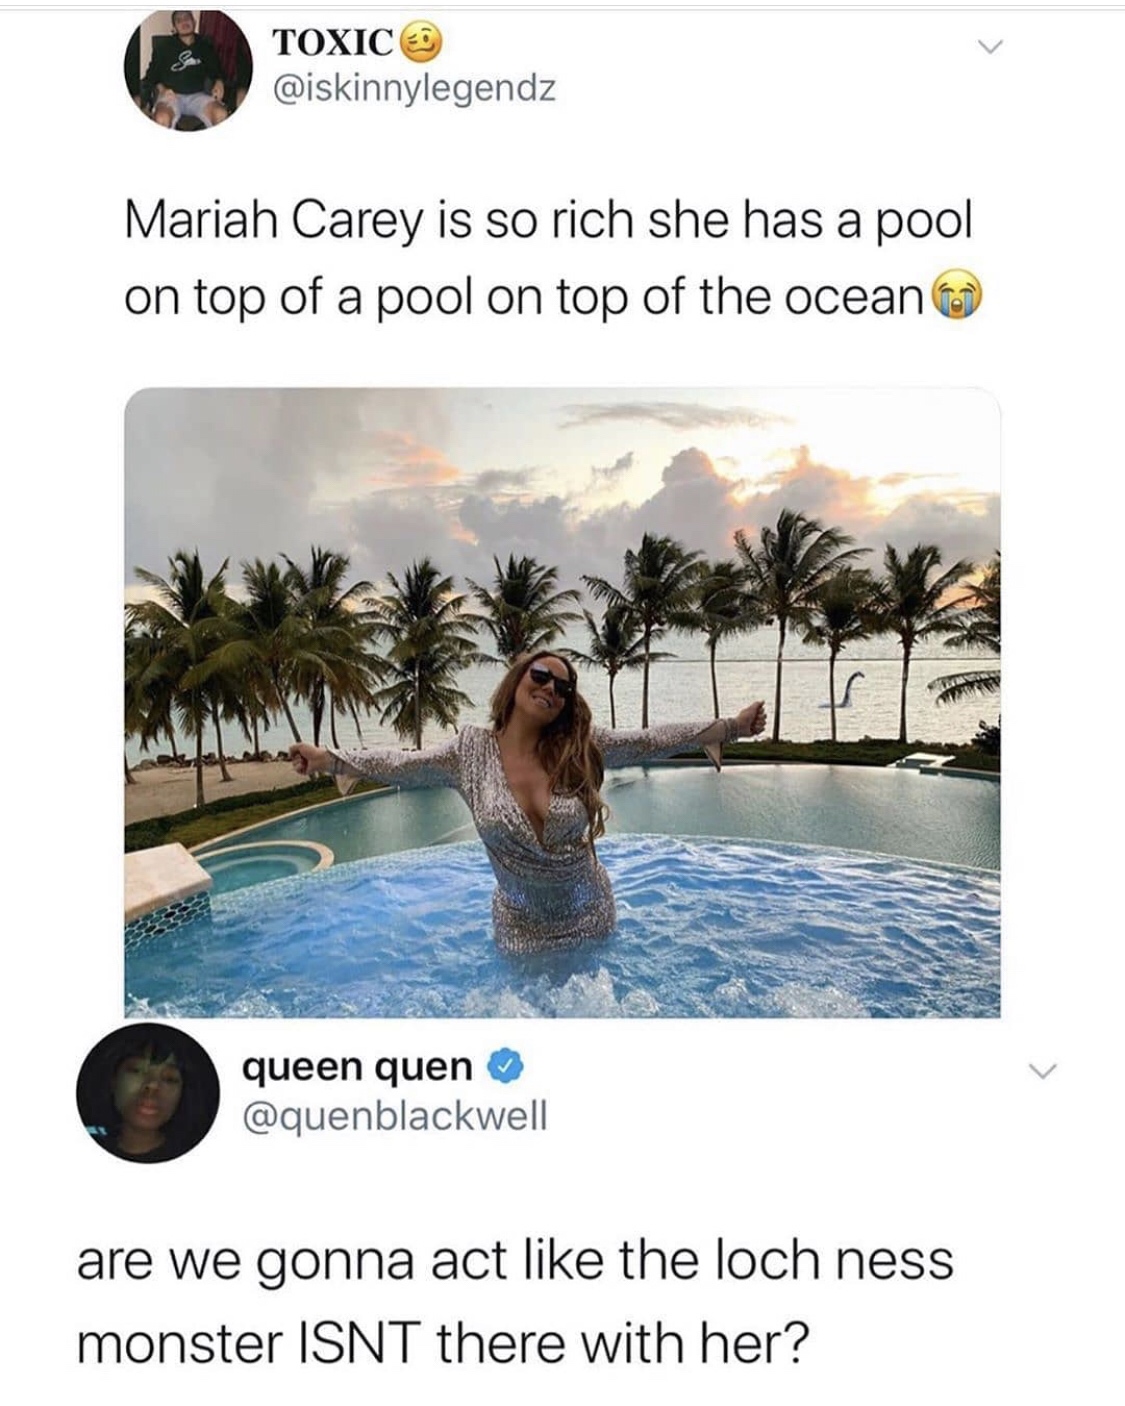 mariah carey hot tub dress - Toxic Mariah Carey is so rich she has a pool on top of a pool on top of the ocean queen quen are we gonna act the loch ness monster Isnt there with her?